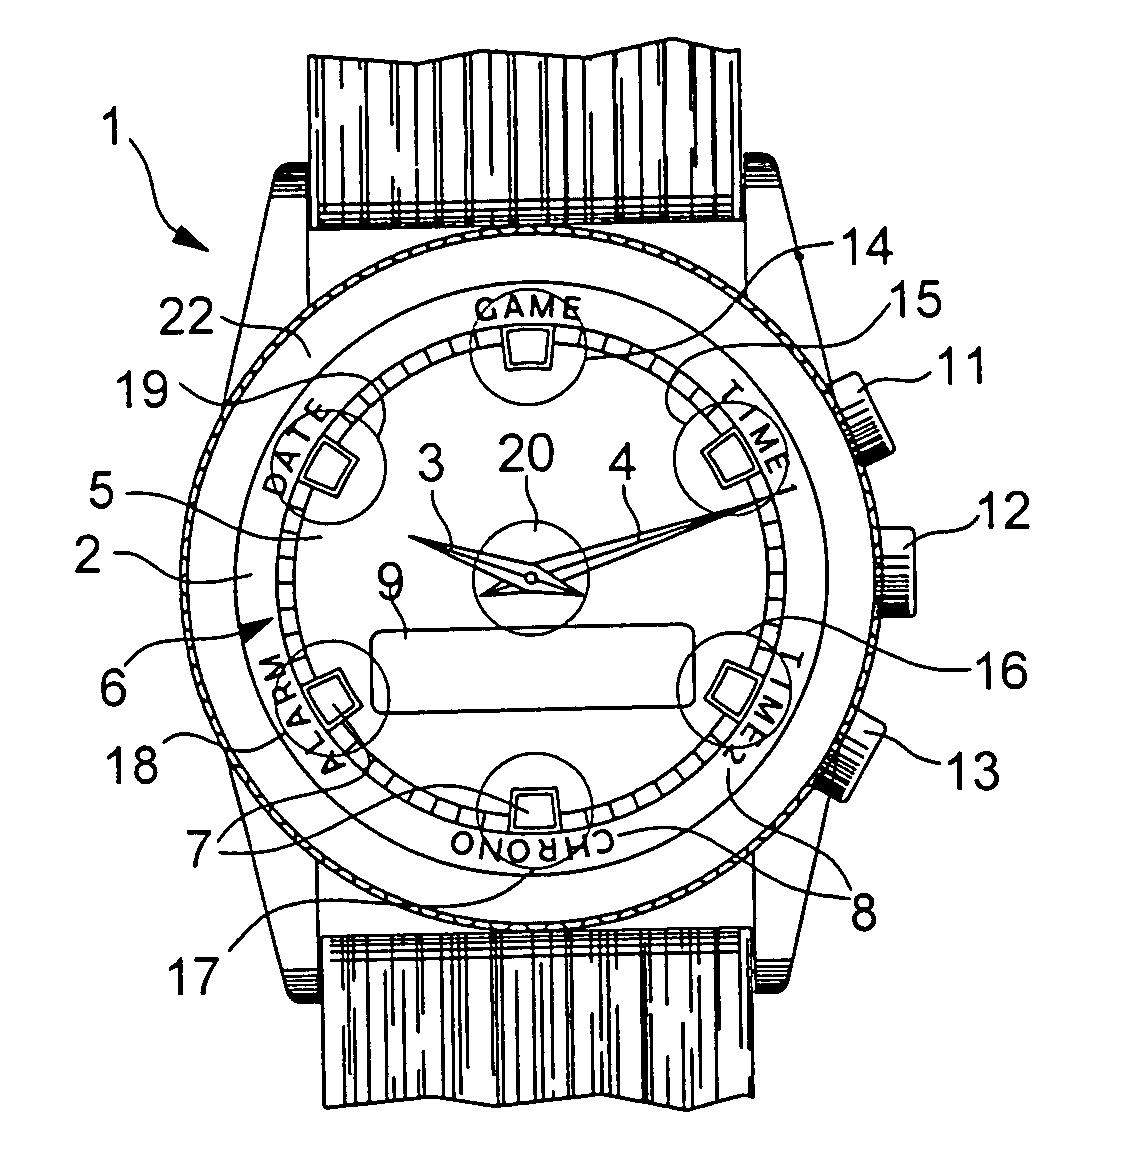 Electronic timepiece including a game mode